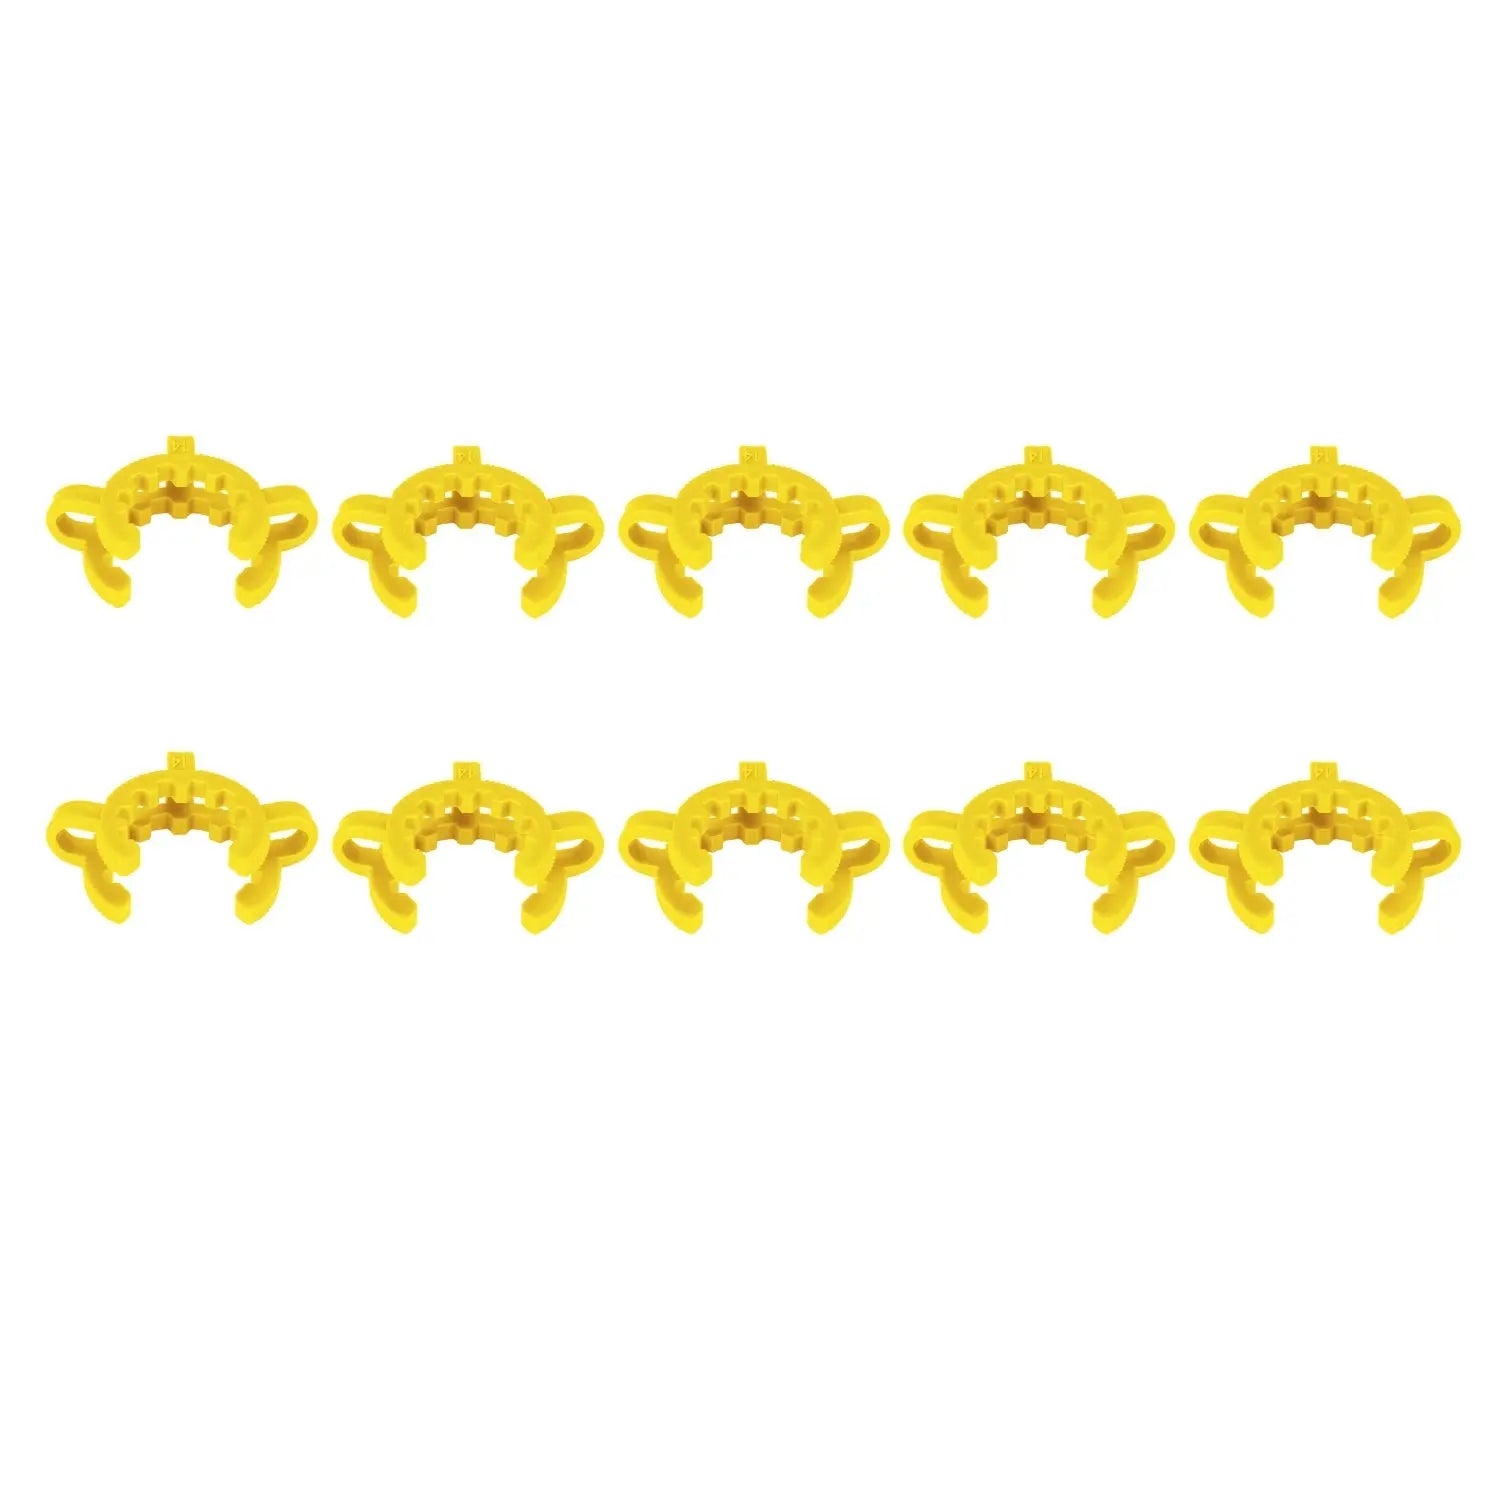 Plastic Joint Clips, #14, 10 Pcs - StonyLab Joint Clips 14-mm-10-Pack